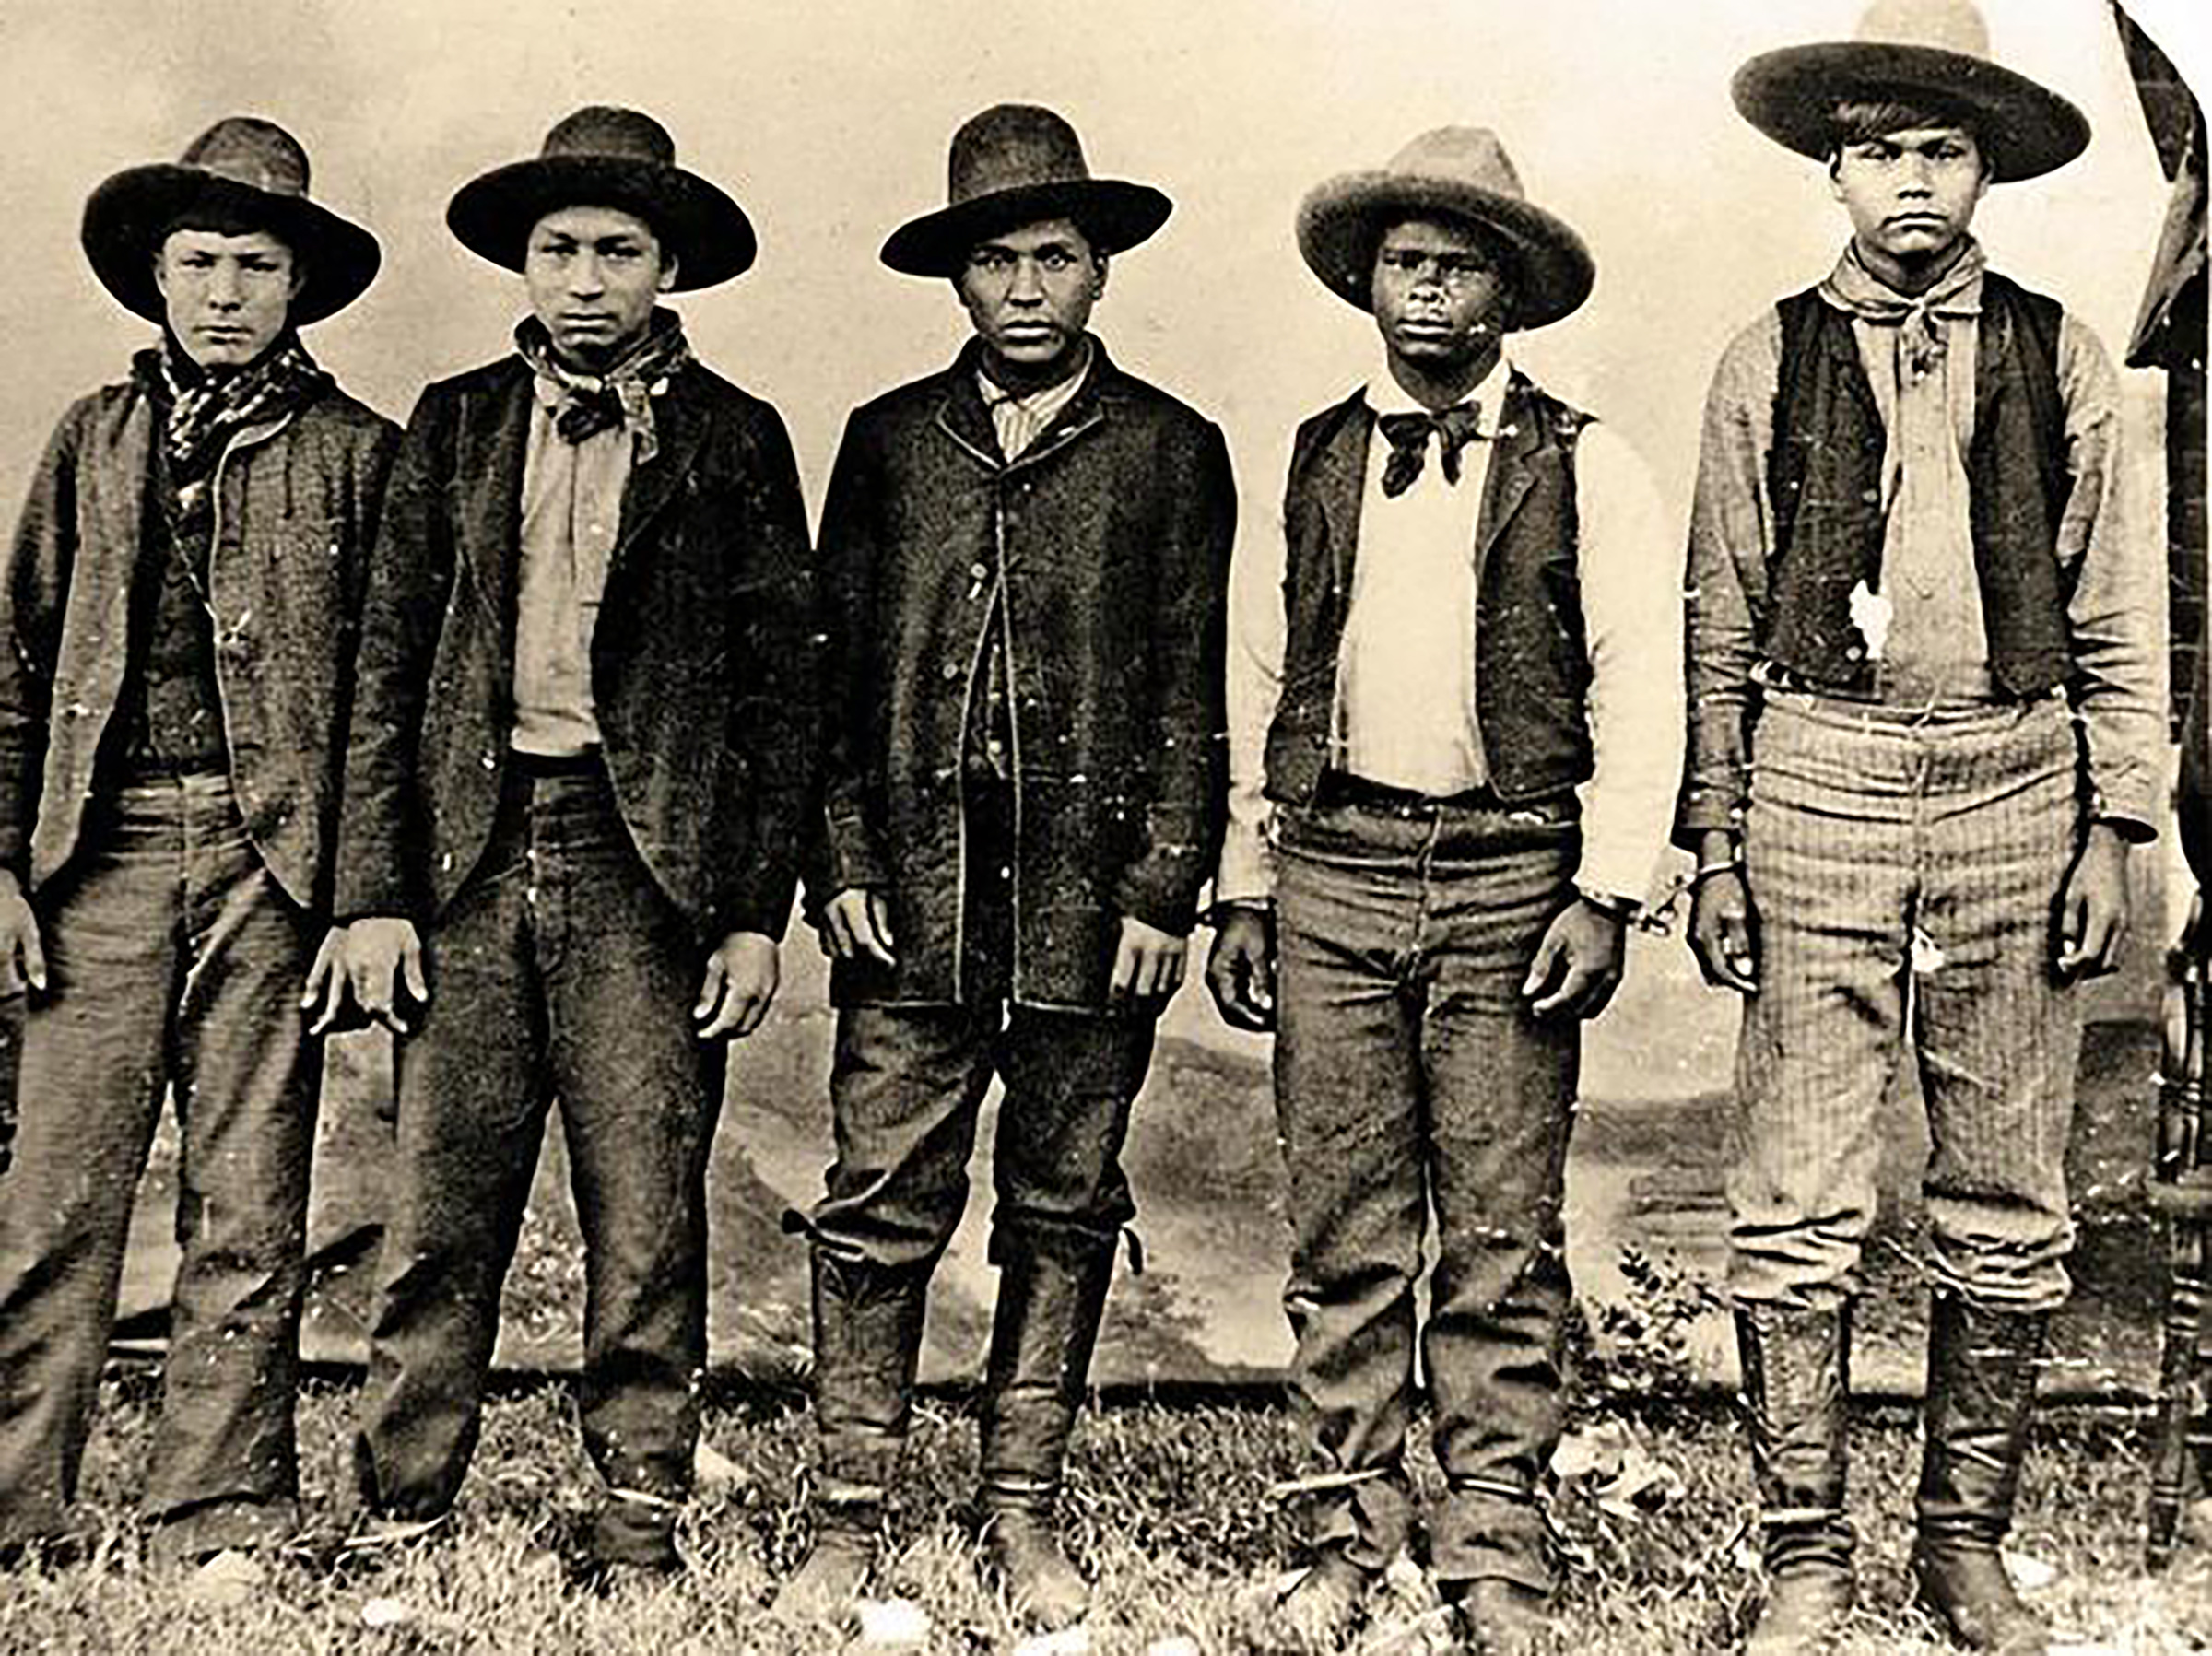 The Real Black Cowboys That Inspired Netflix's The Harder They Fall